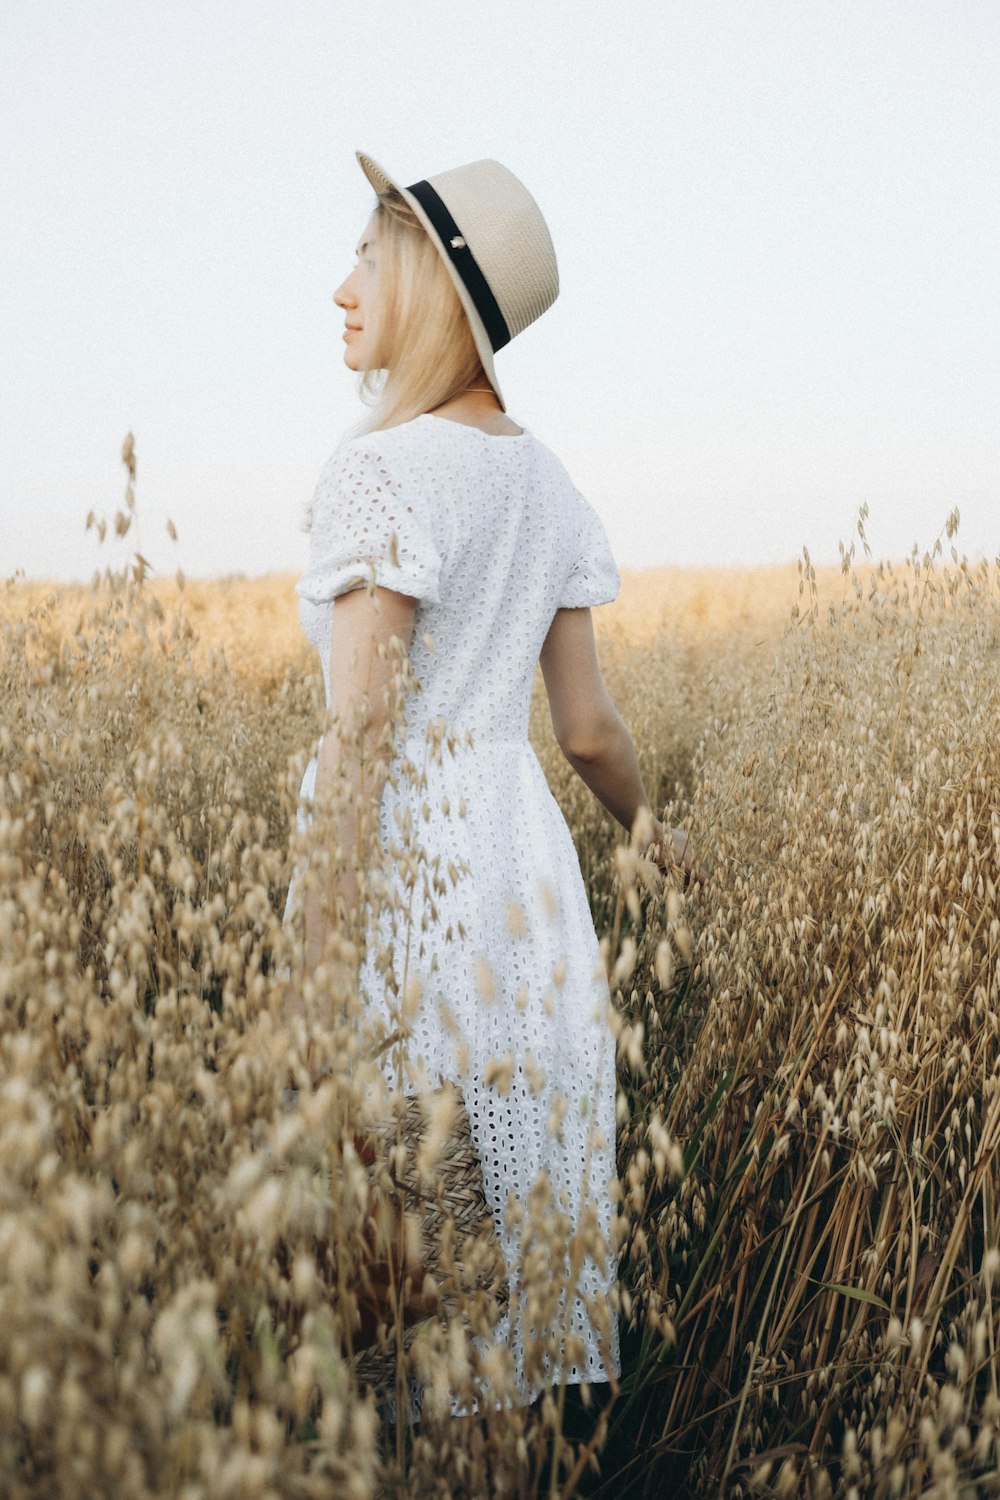 woman in white floral dress standing on brown wheat field during daytime